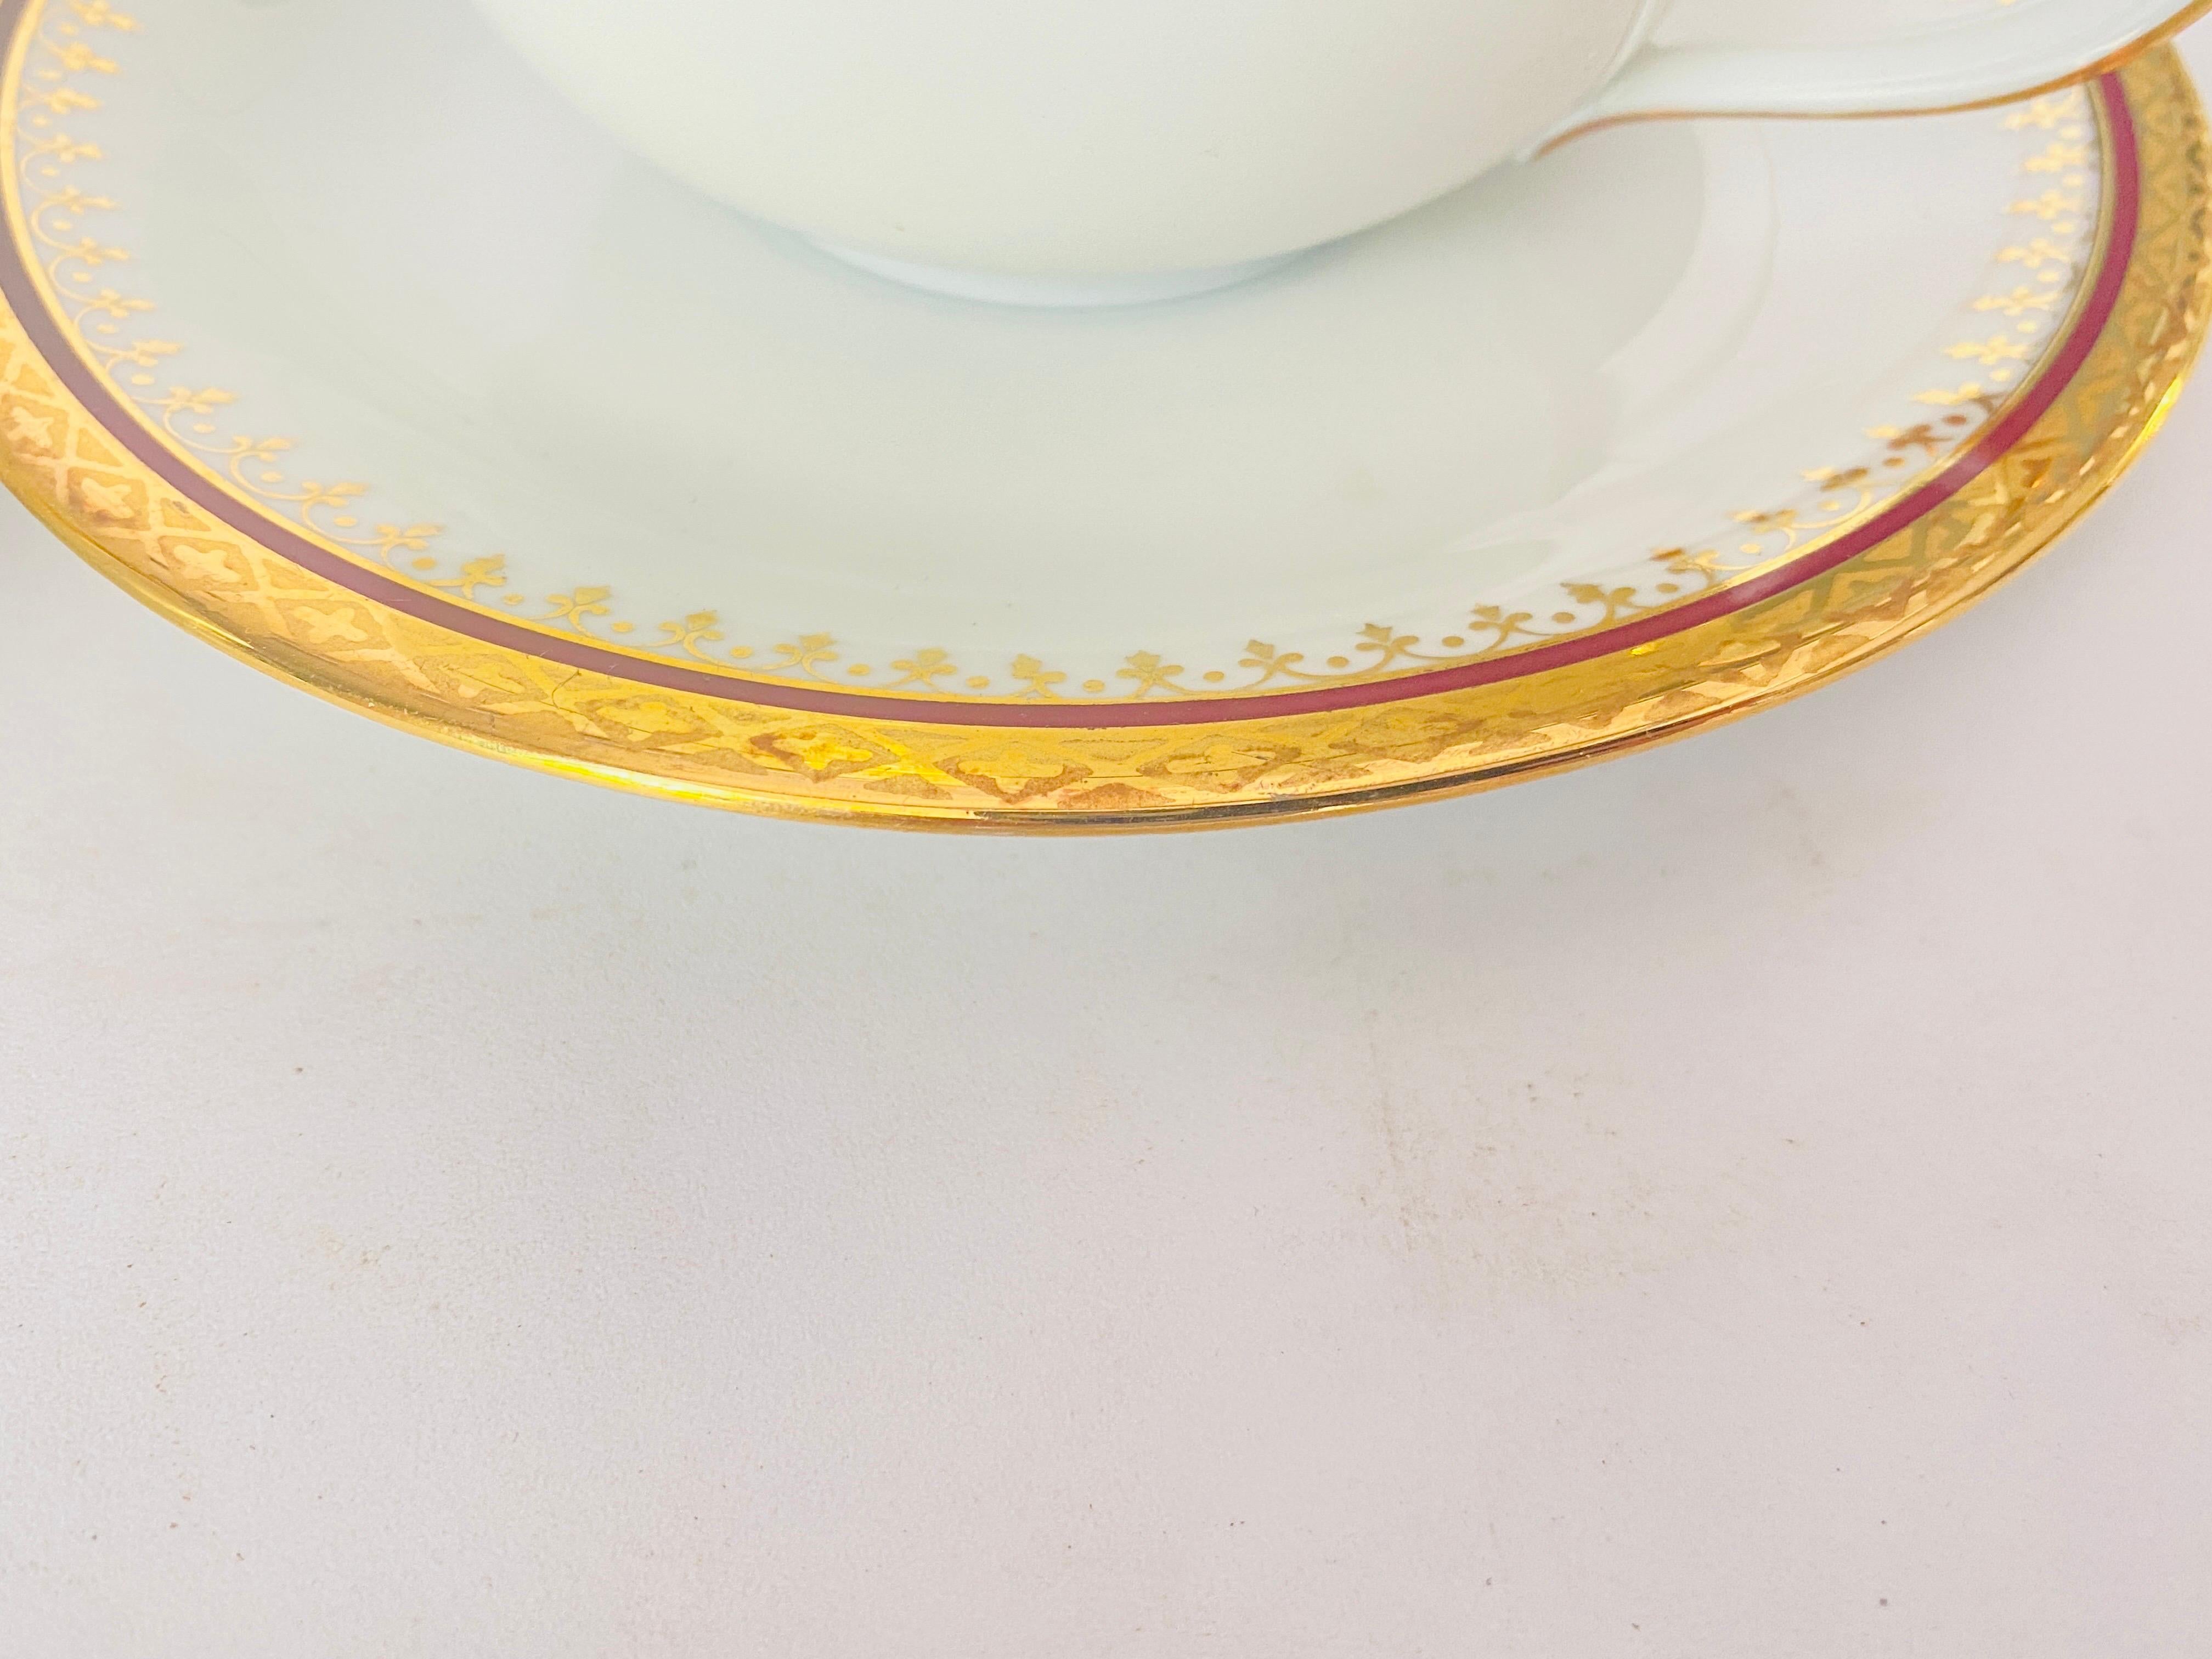 Late 20th Century Midcentury Limoges Coffee Cup and under Plates in Porcelain and Gold 12 Pieces